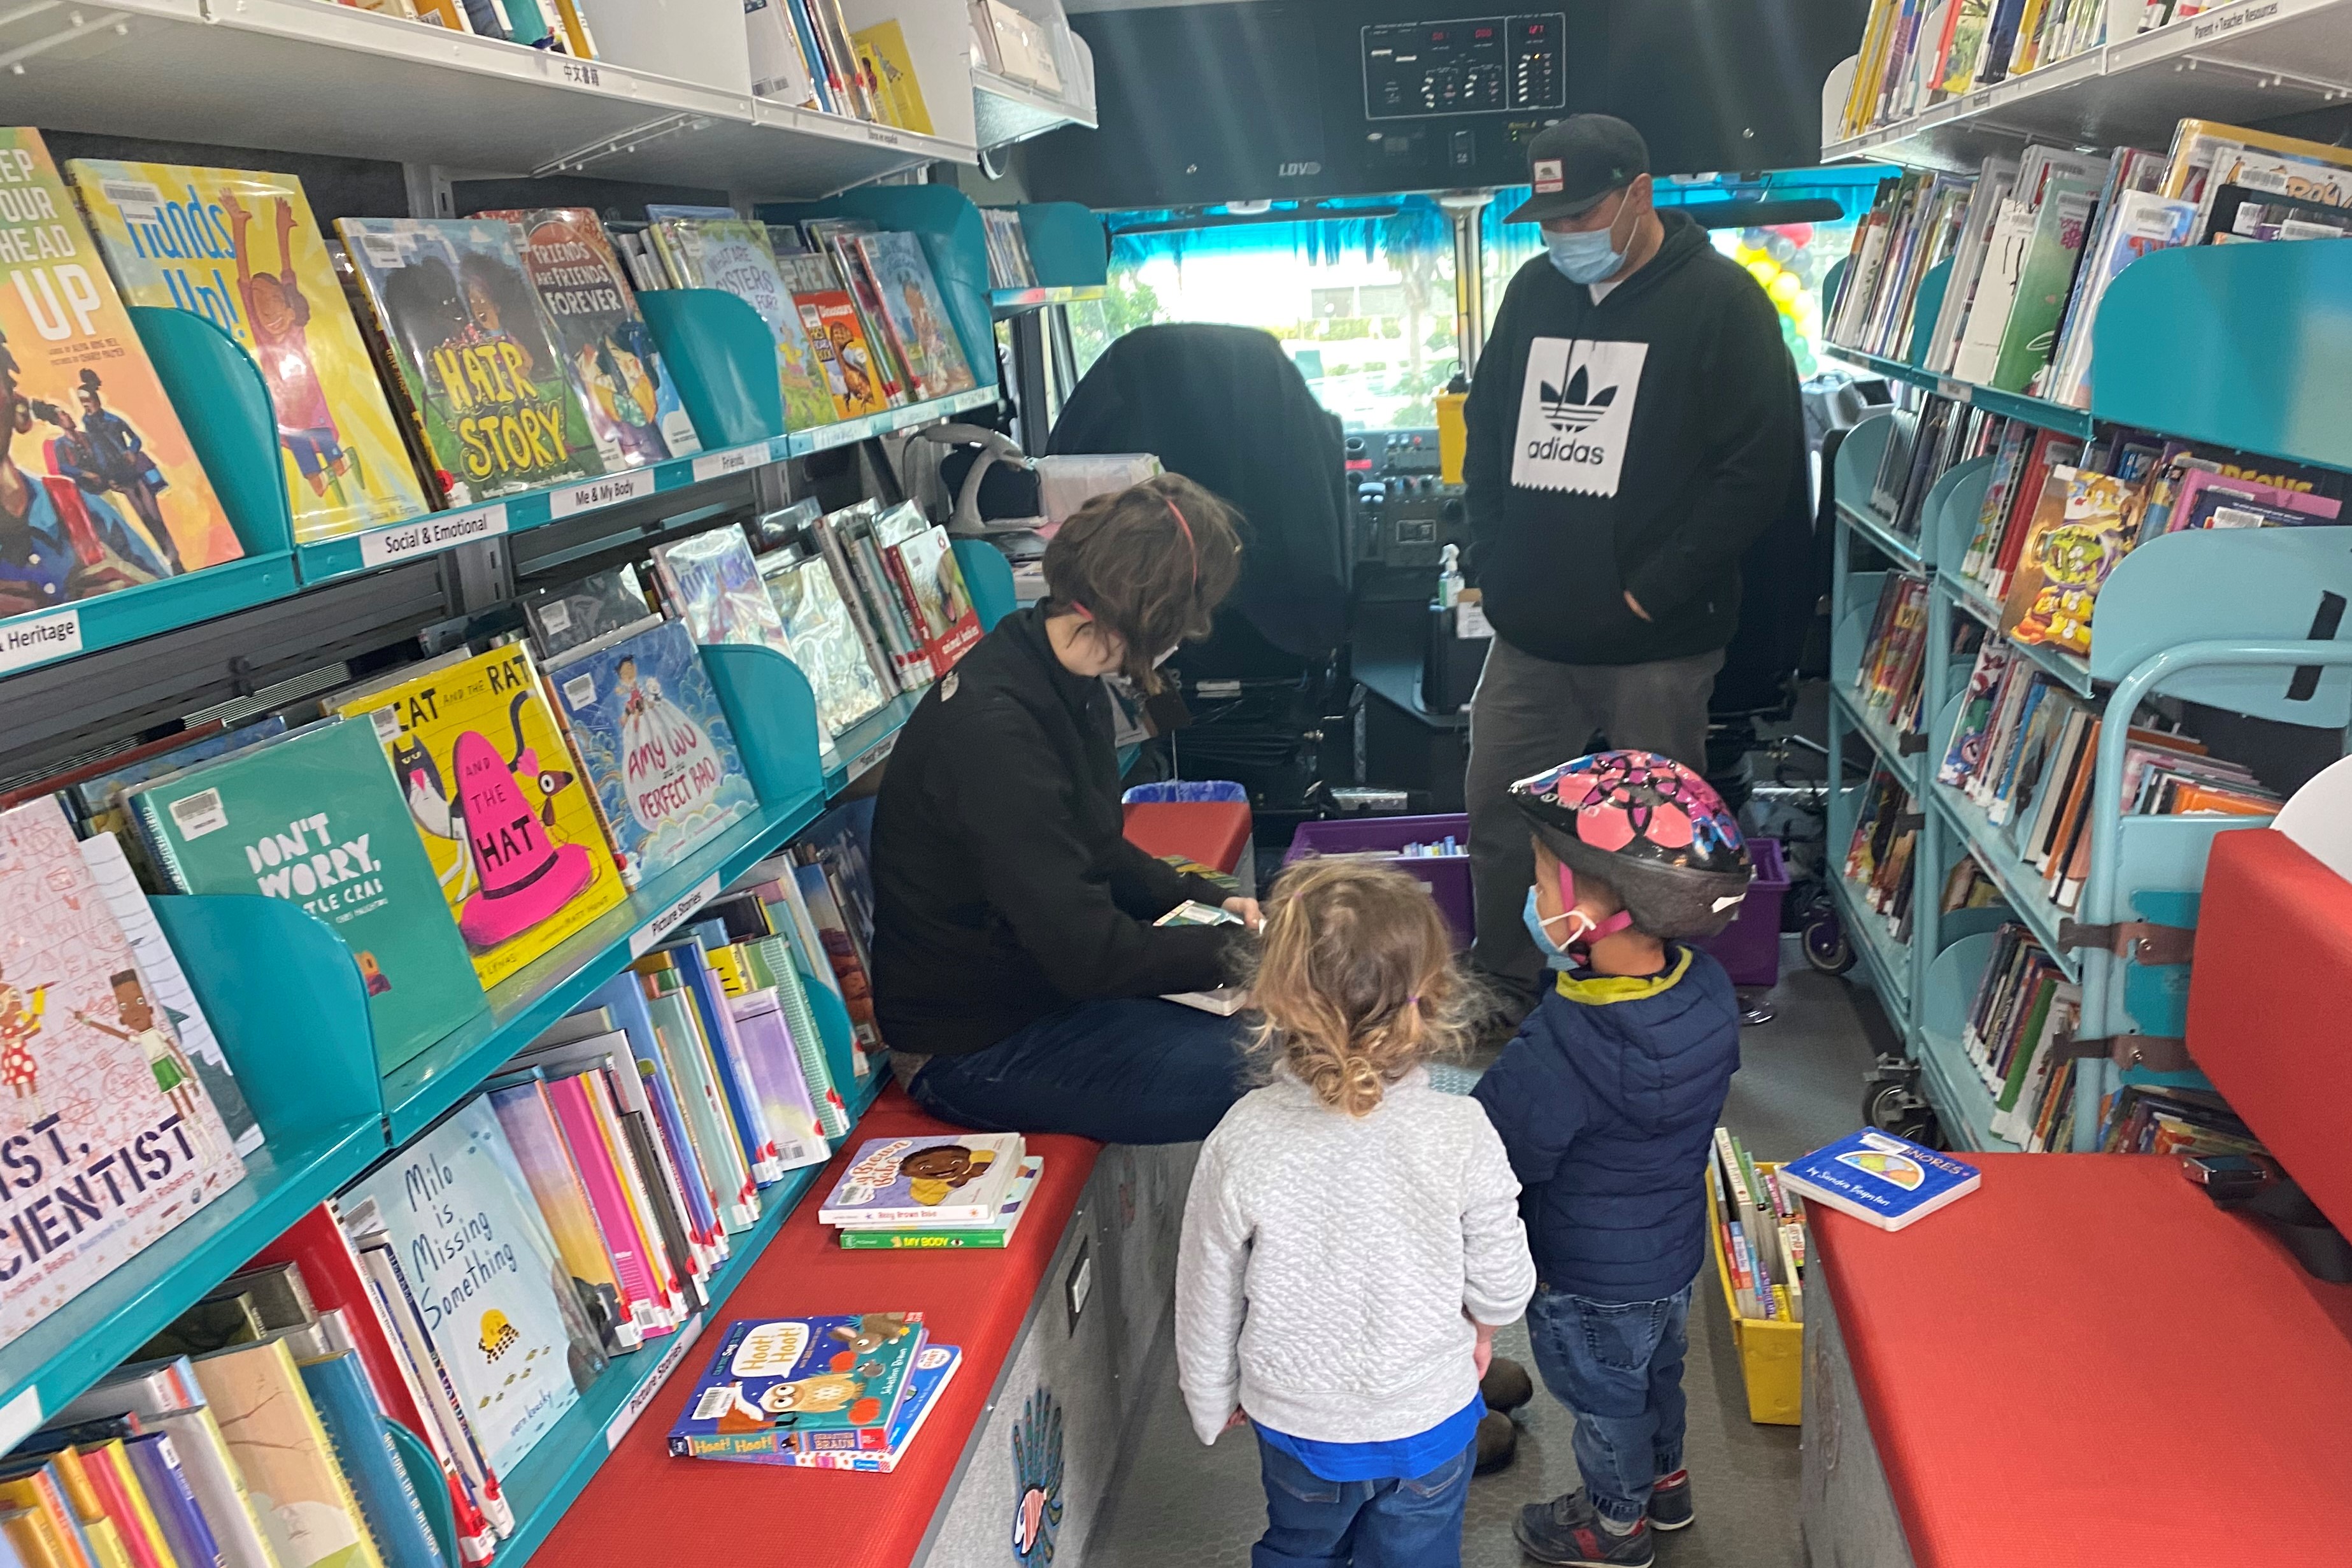 Adults and children look at books inside the Bookmobile